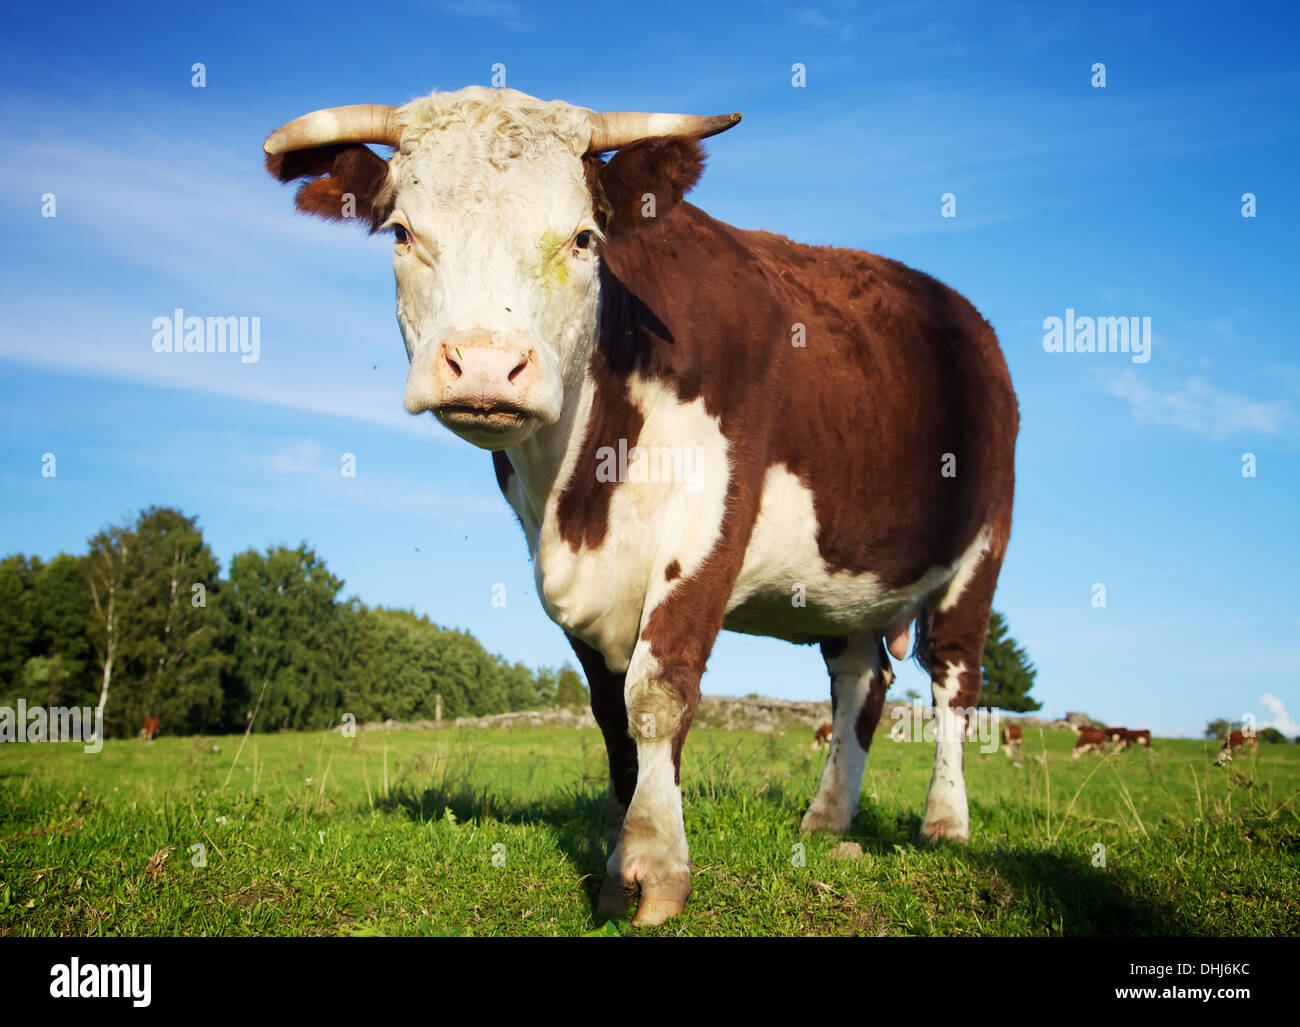 Big cow standing on the meadow in summer Stock Photo